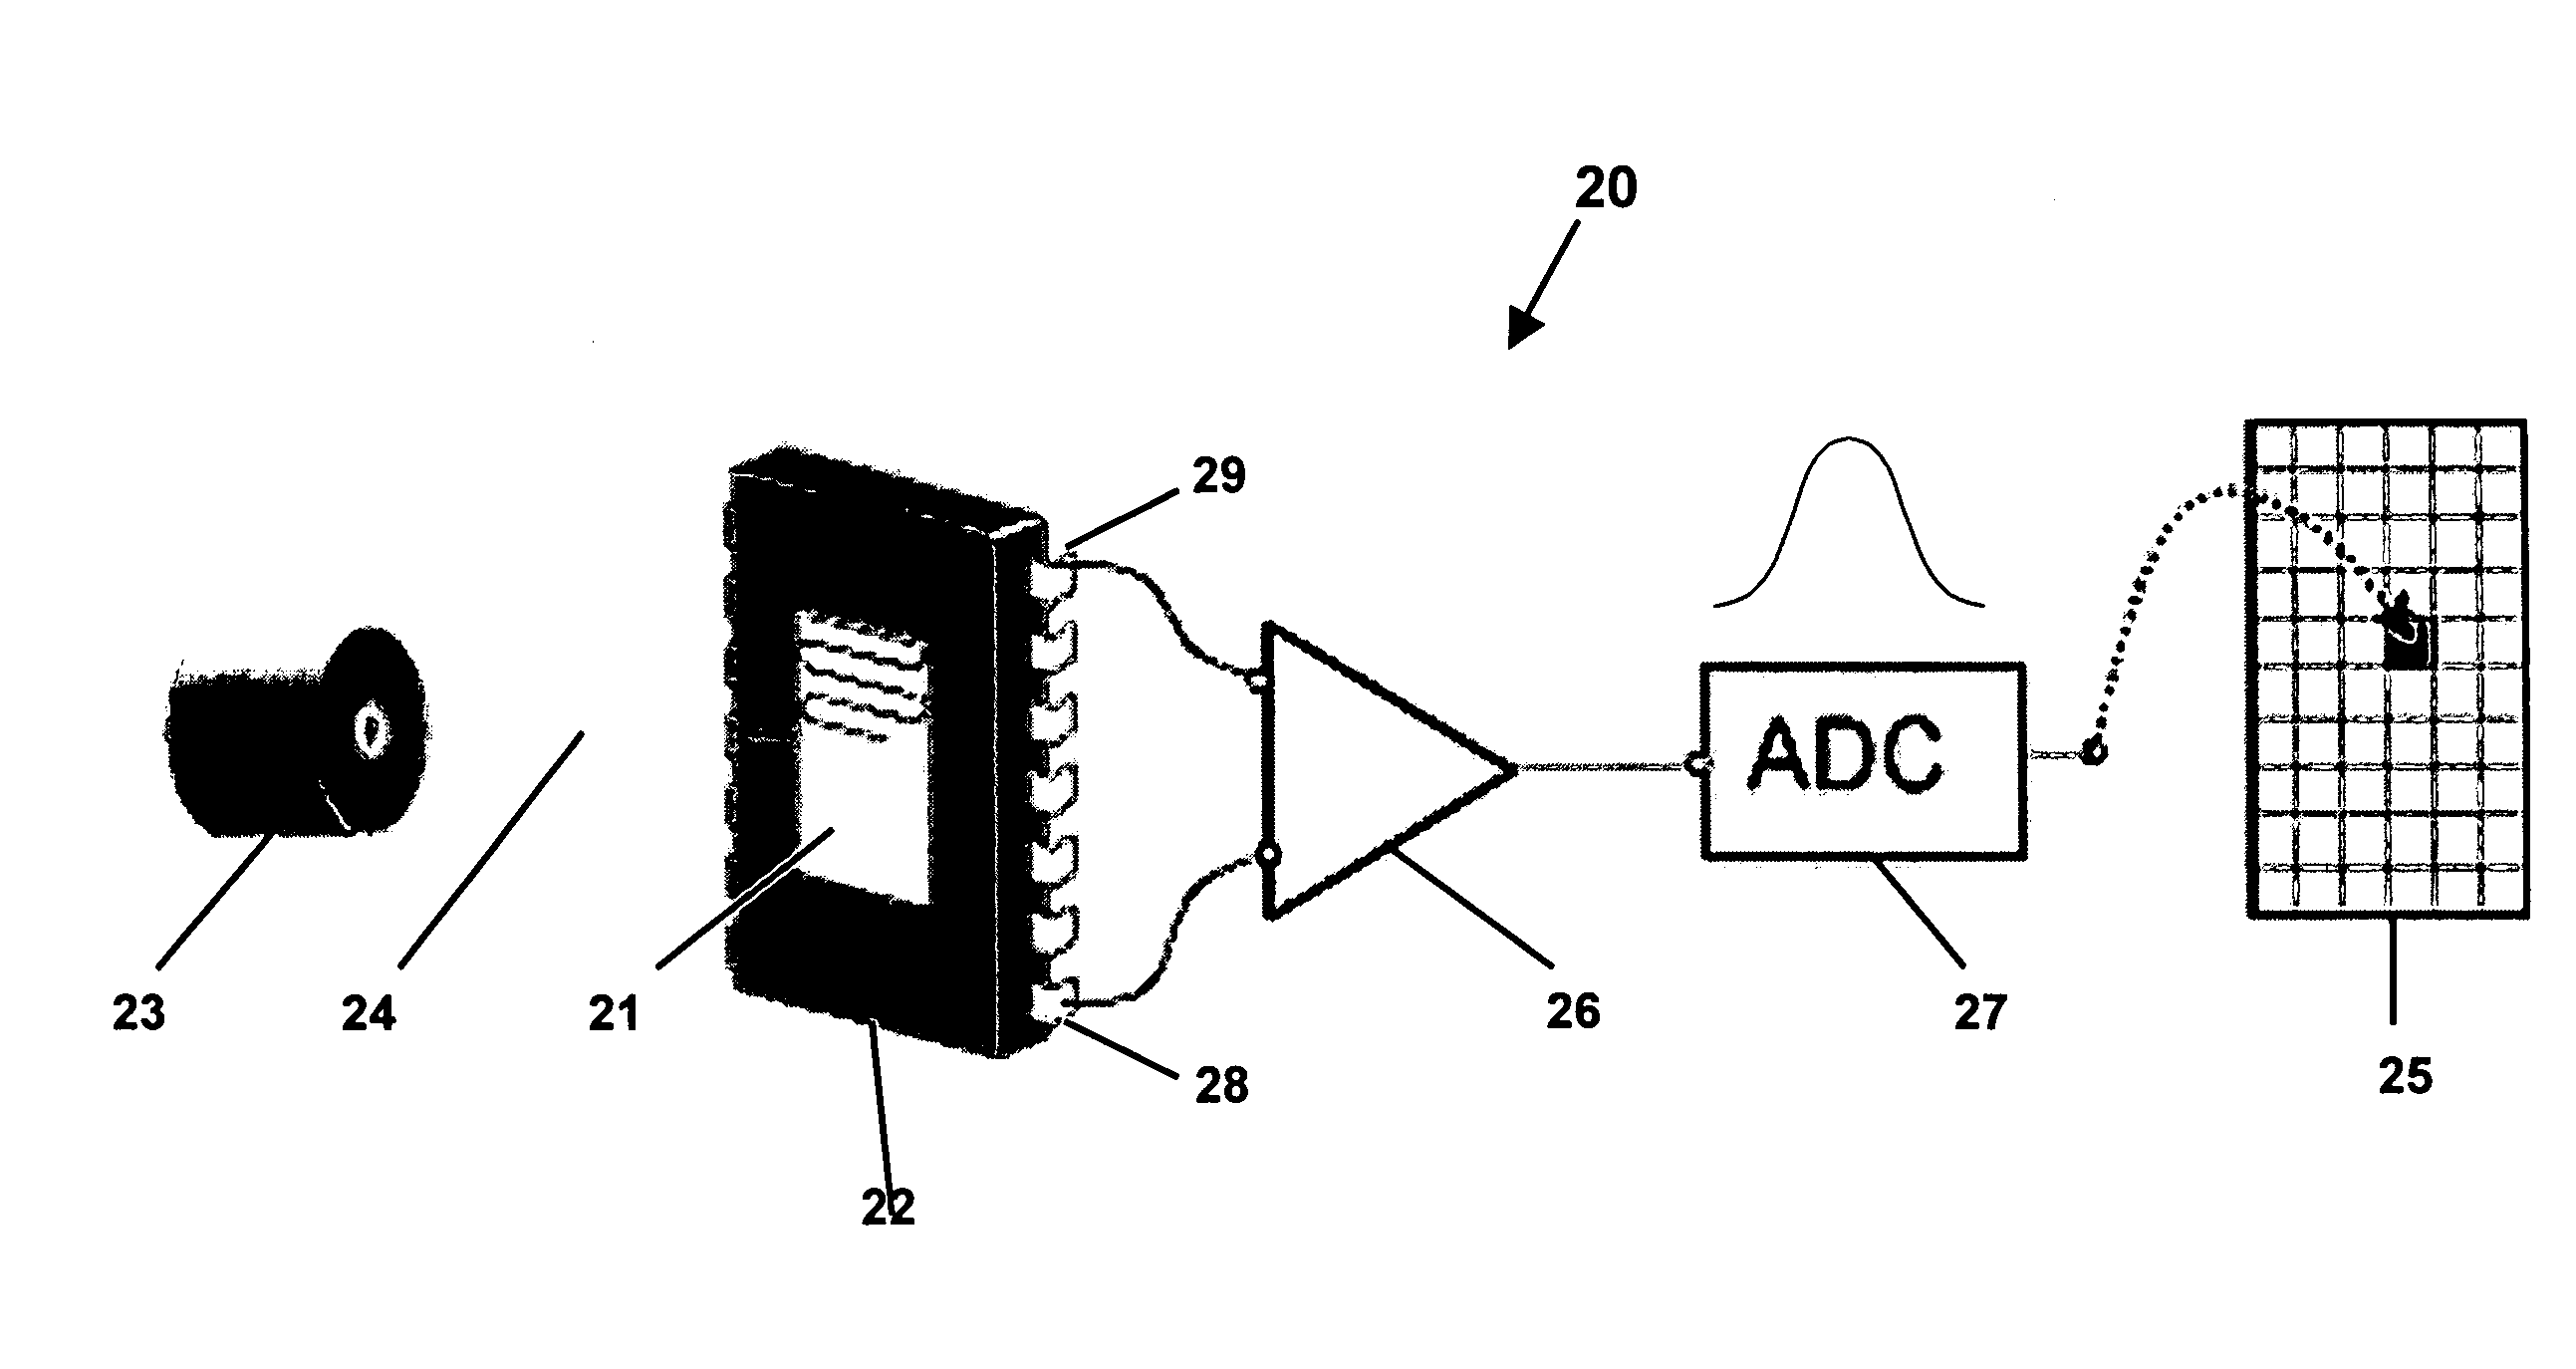 Laser-based irradiation apparatus and methods for monitoring the dose-rate response of semiconductor devices